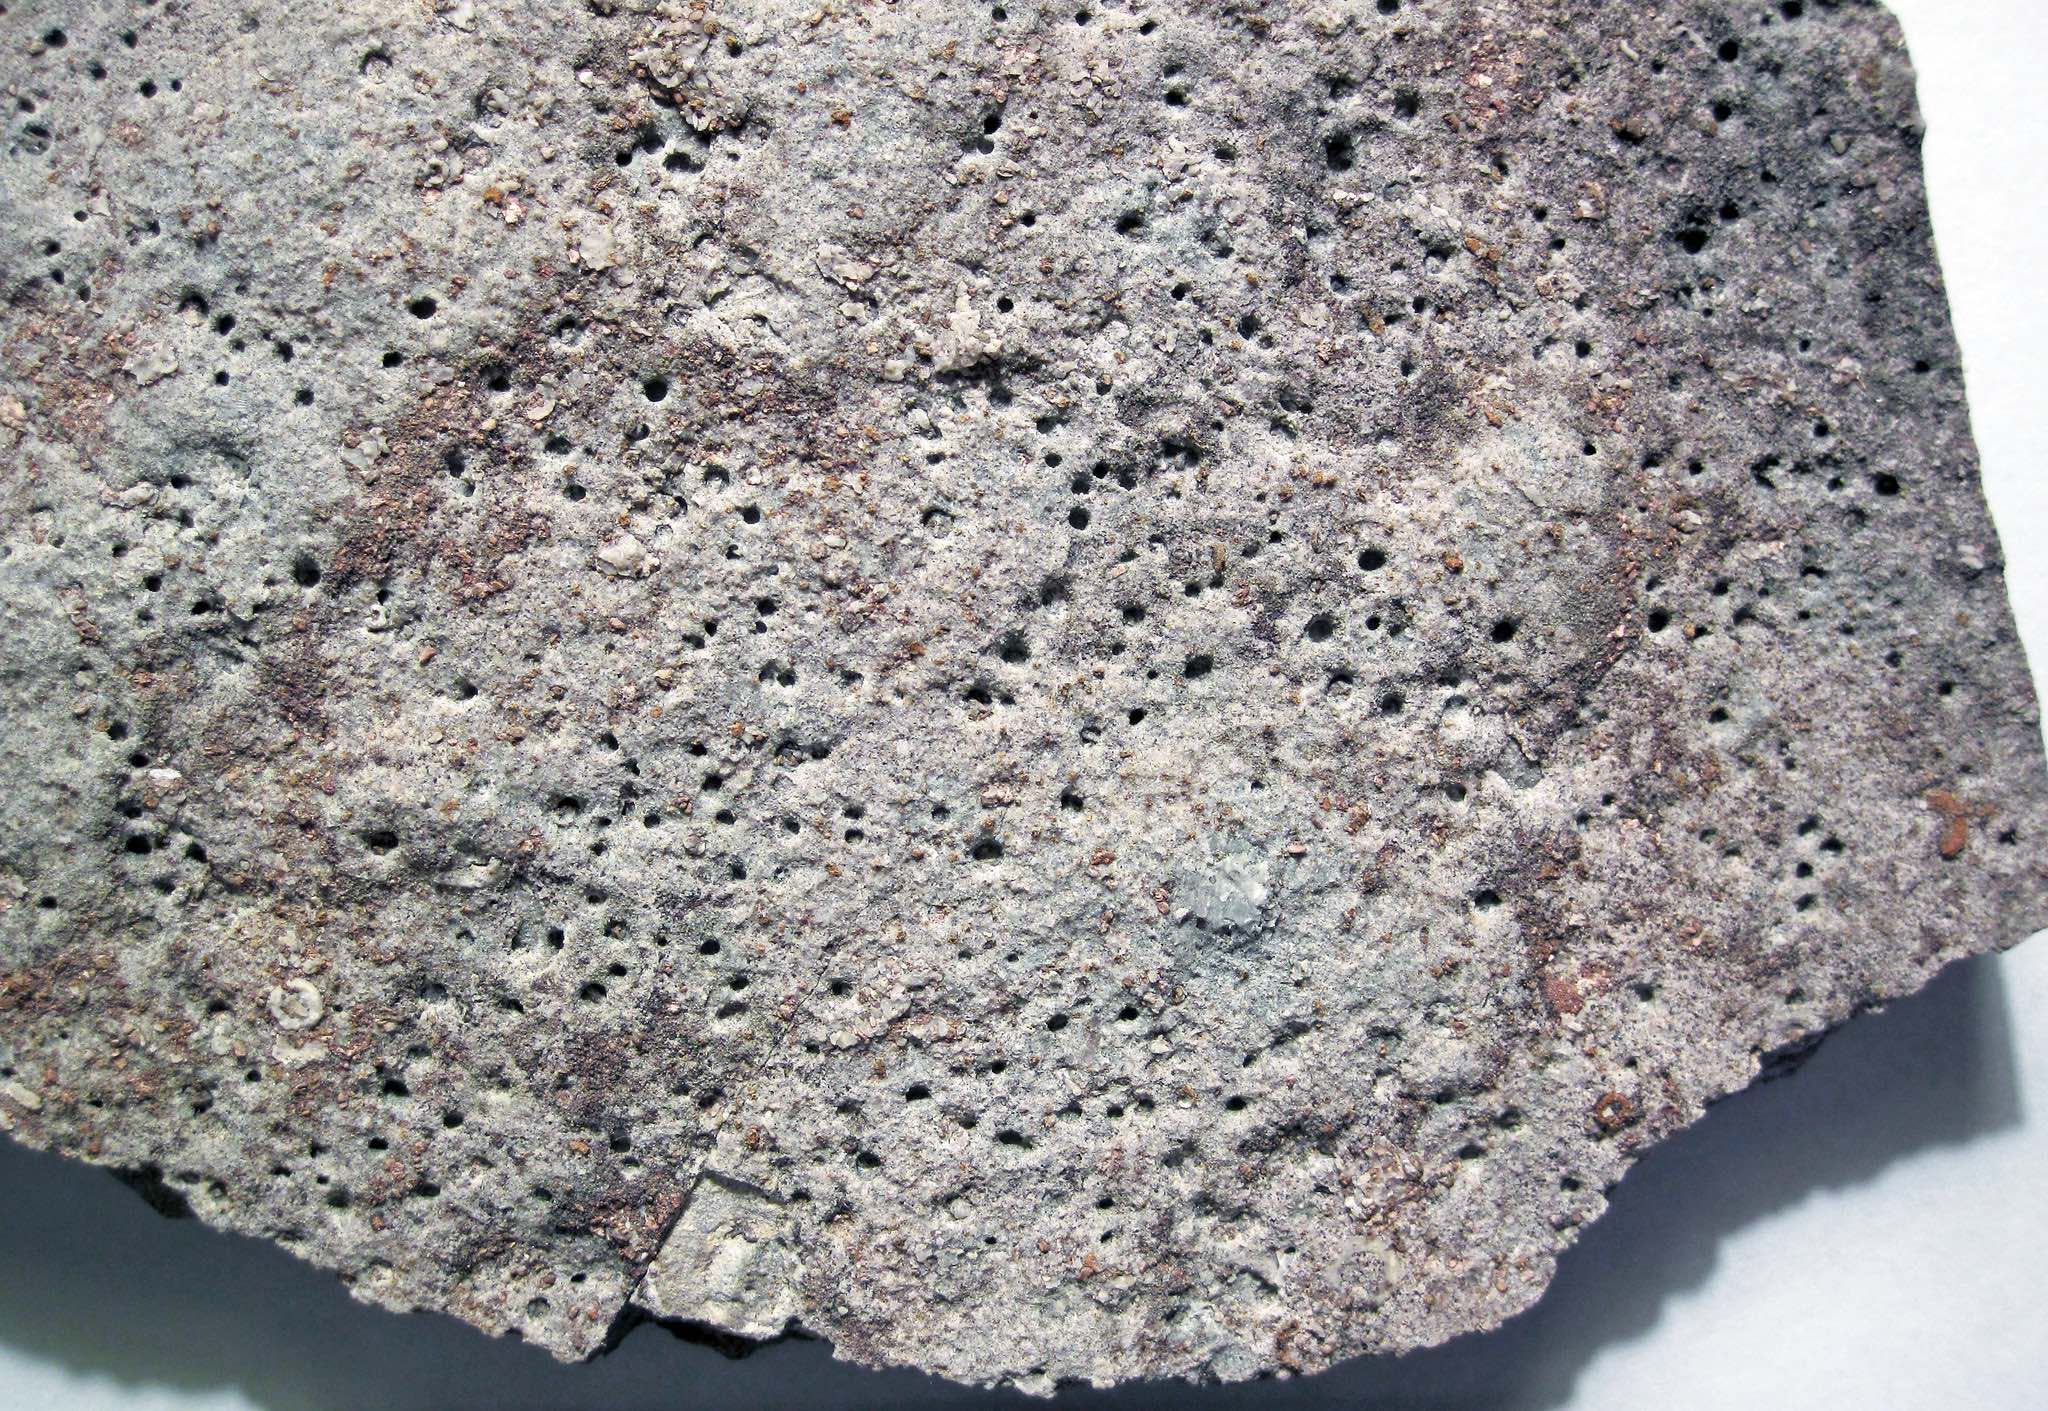 This rock has numerous circular holes, which are the Trypanites burrows.